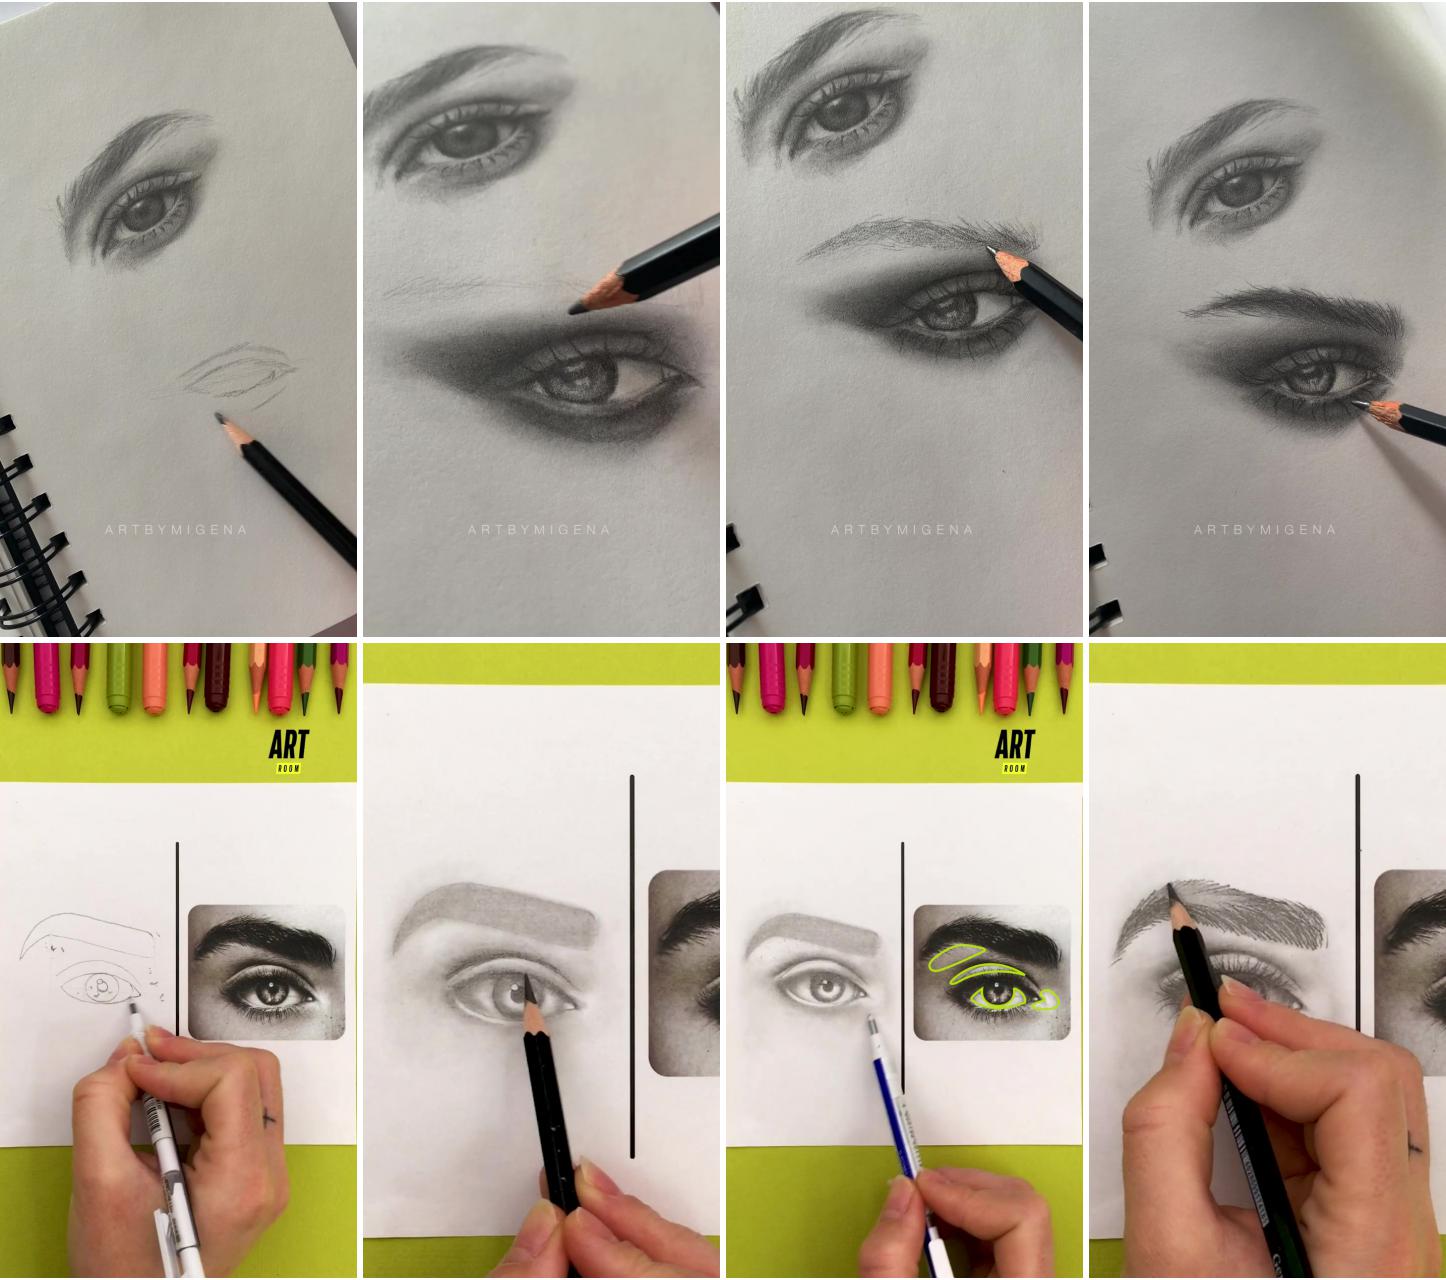 How to draw an eye #art | i draw an eye with this mind blowing technique 